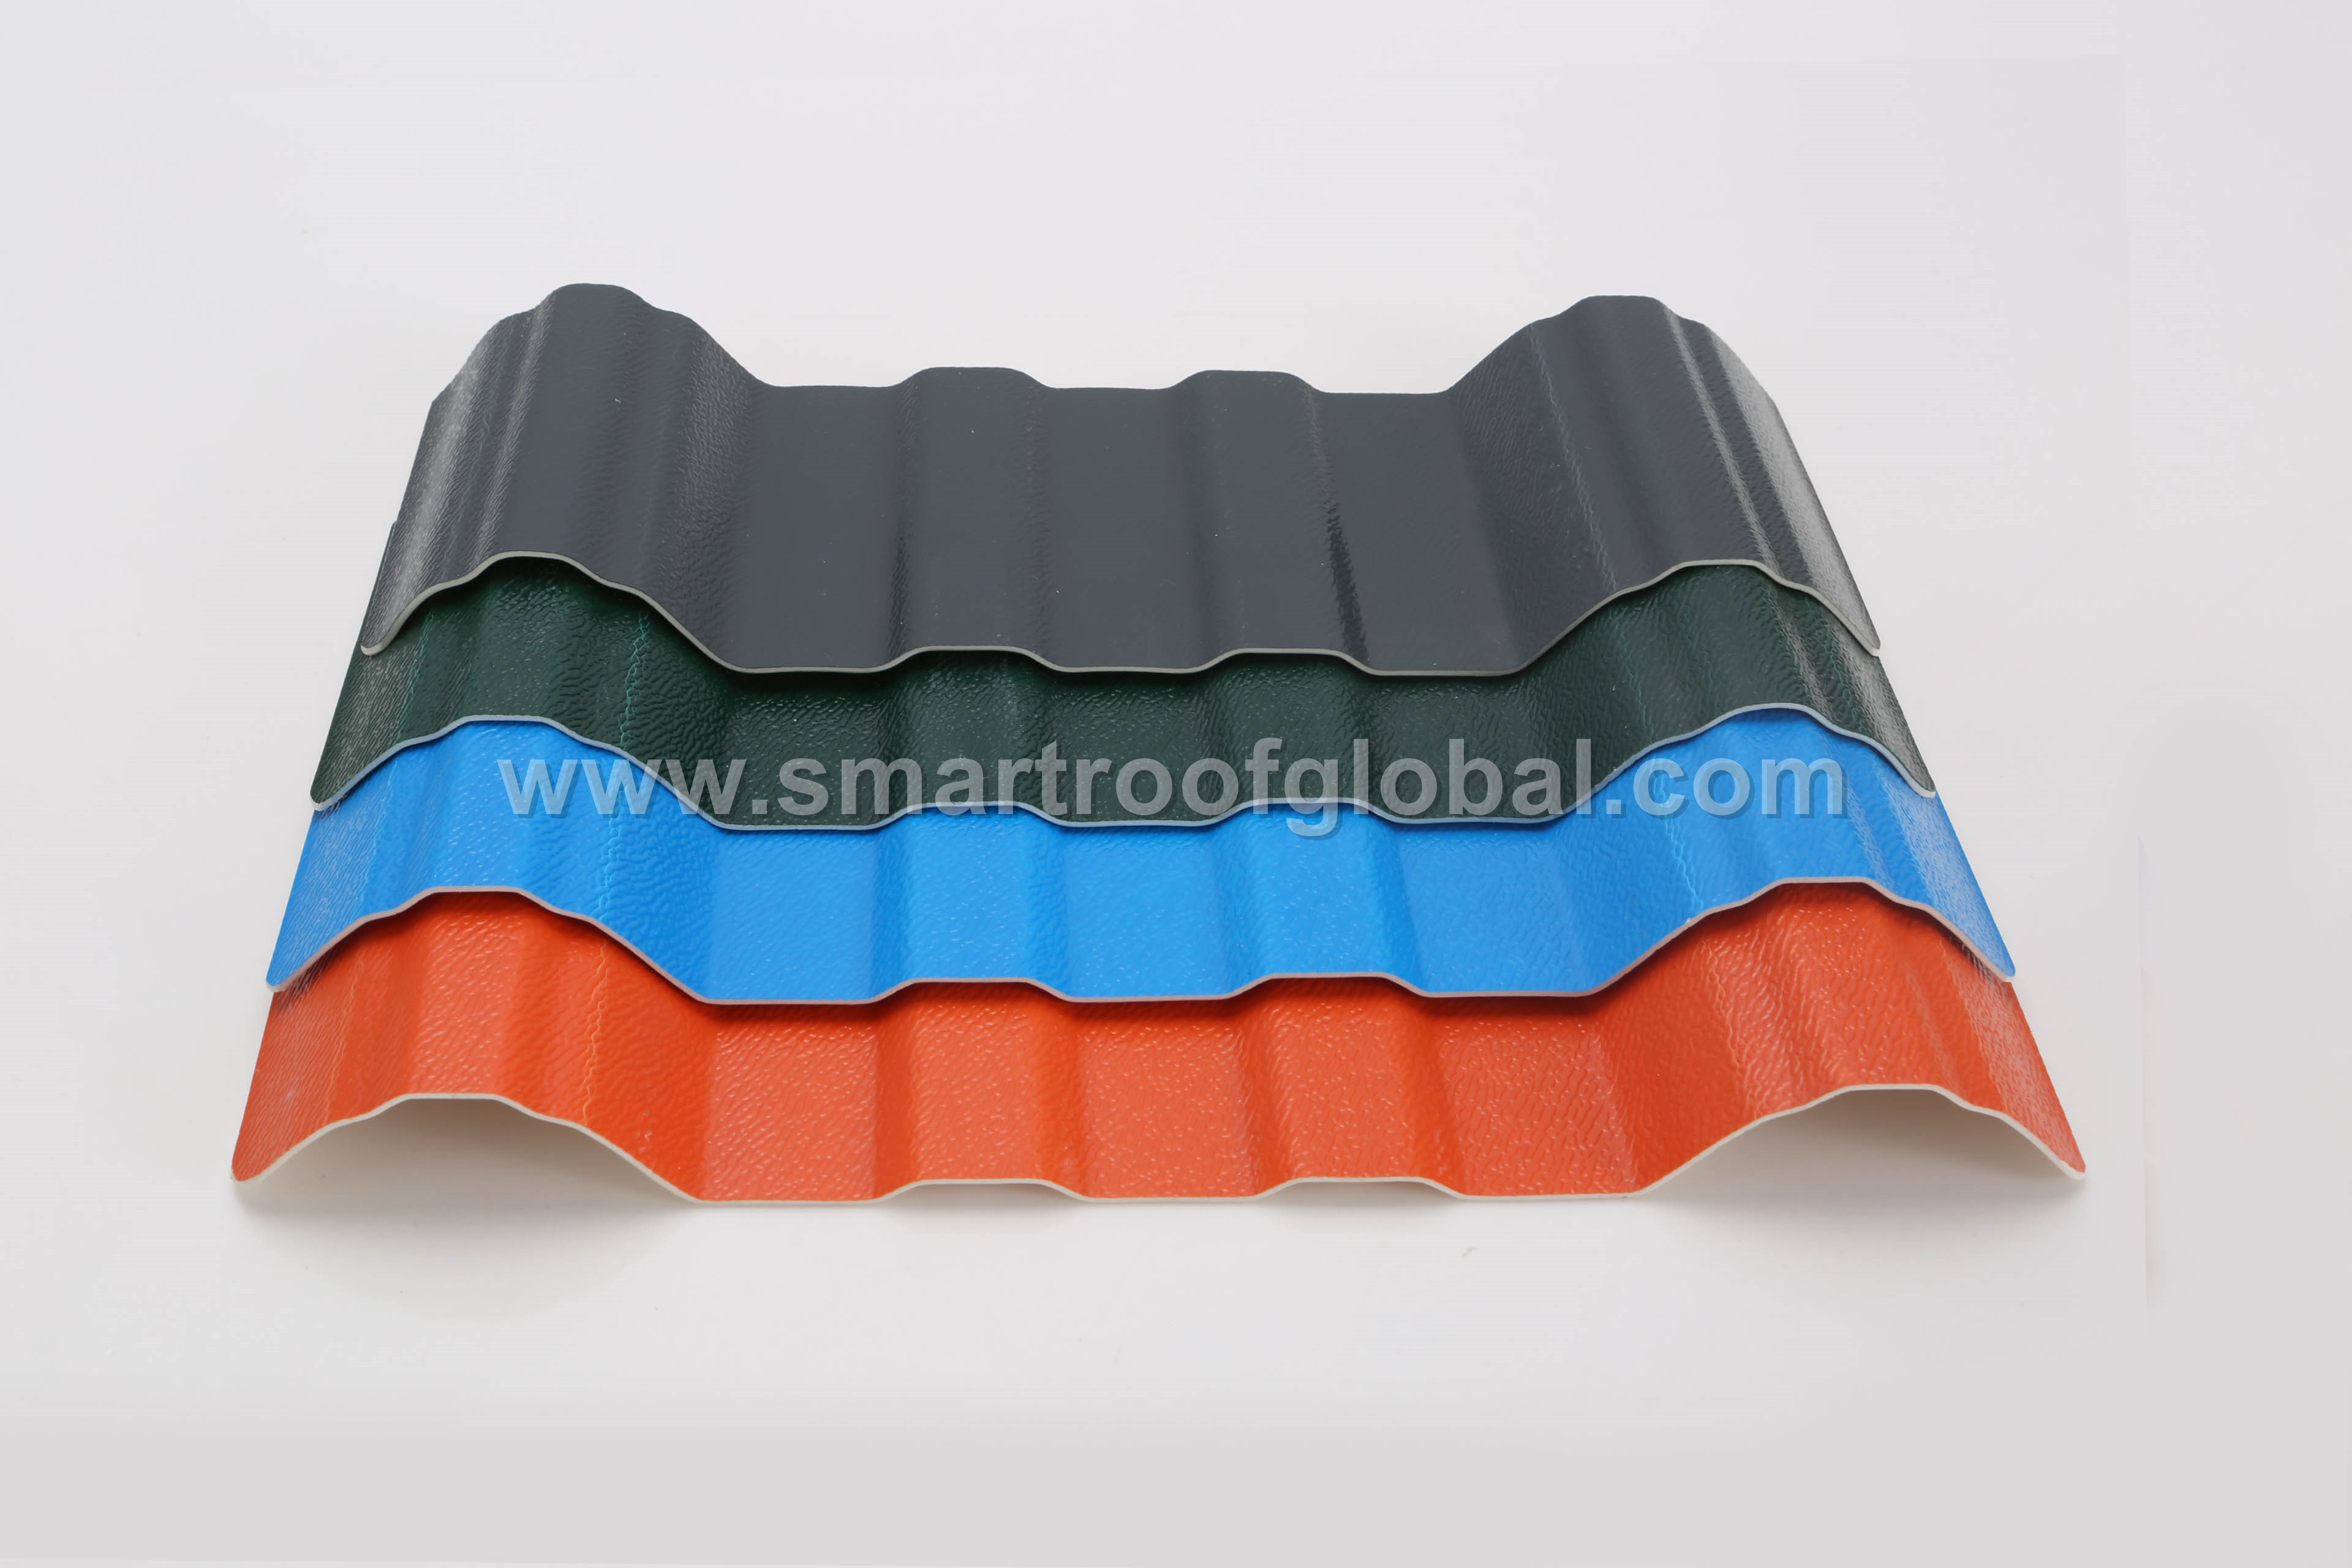 Corrugated Plastic Roof Panels, Corrugated Plastic Roofing Sheets Suppliers